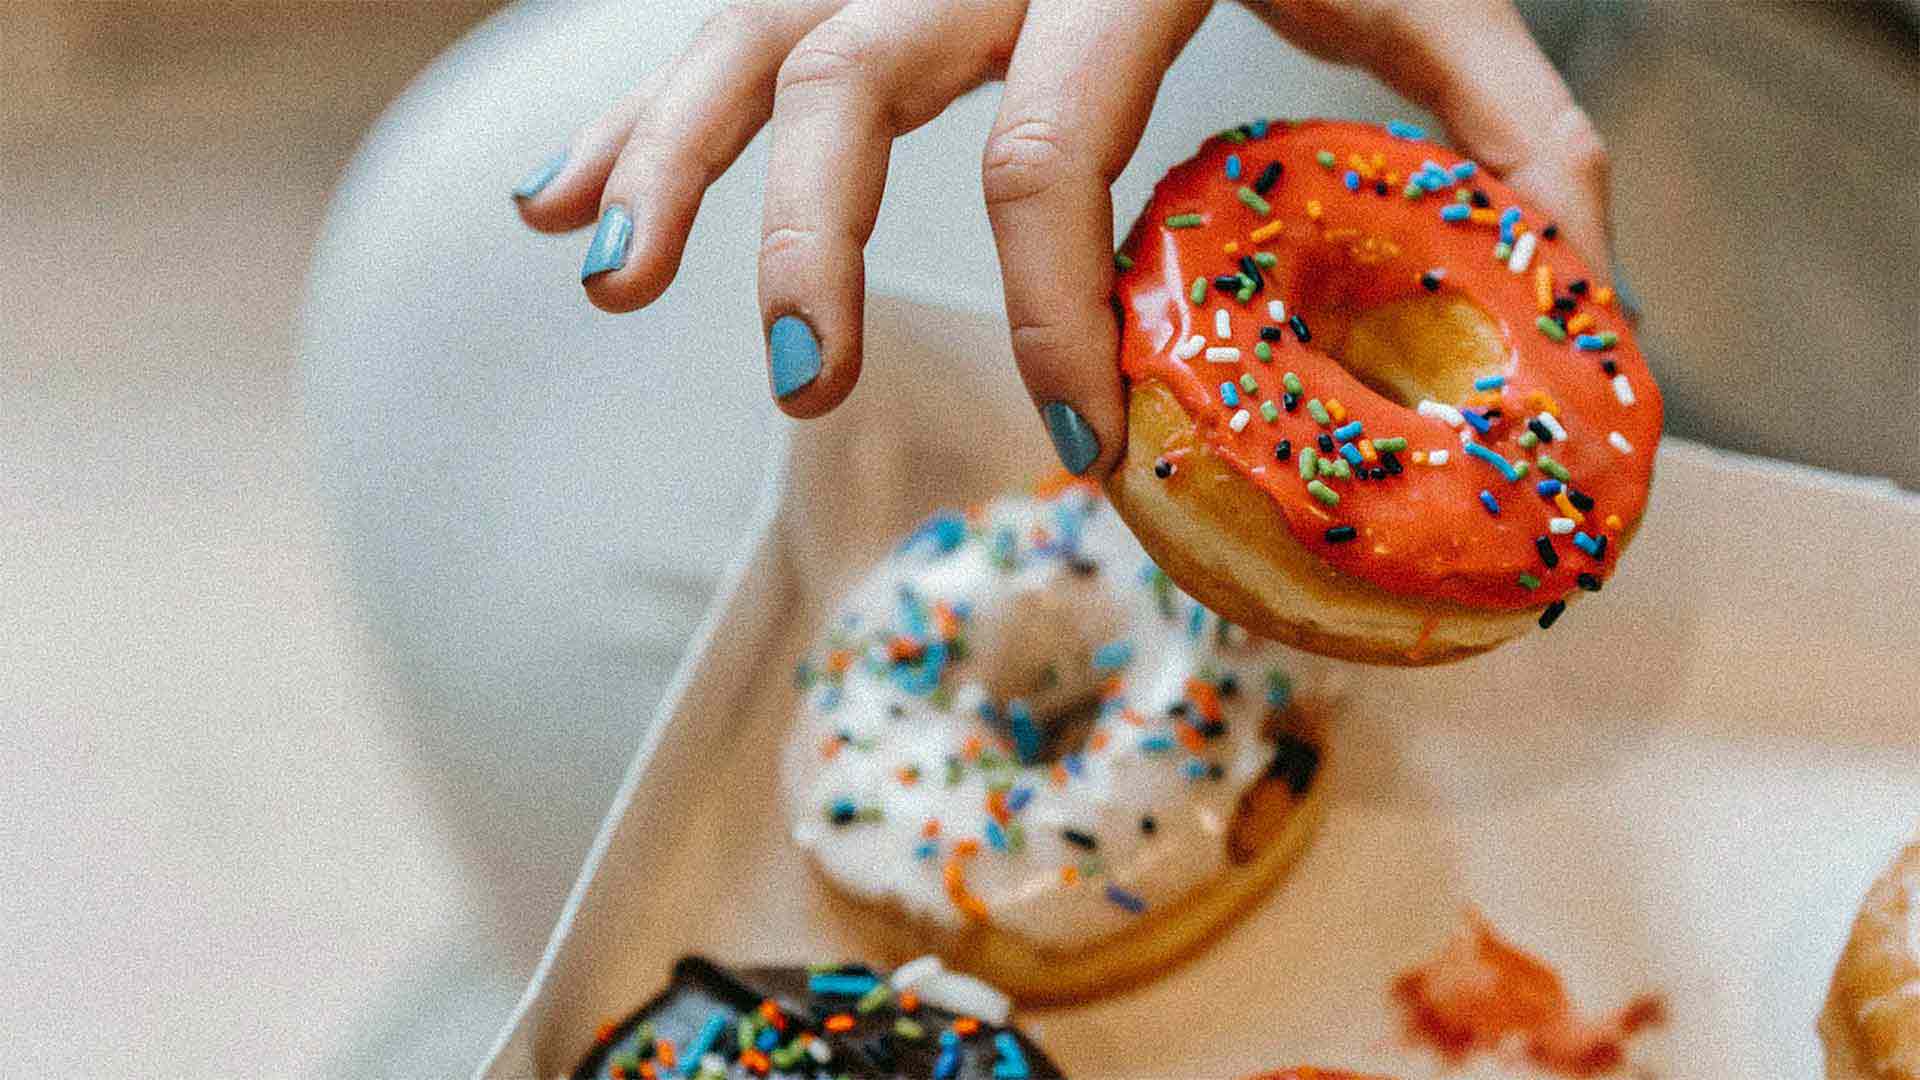 a hand reaching for donuts